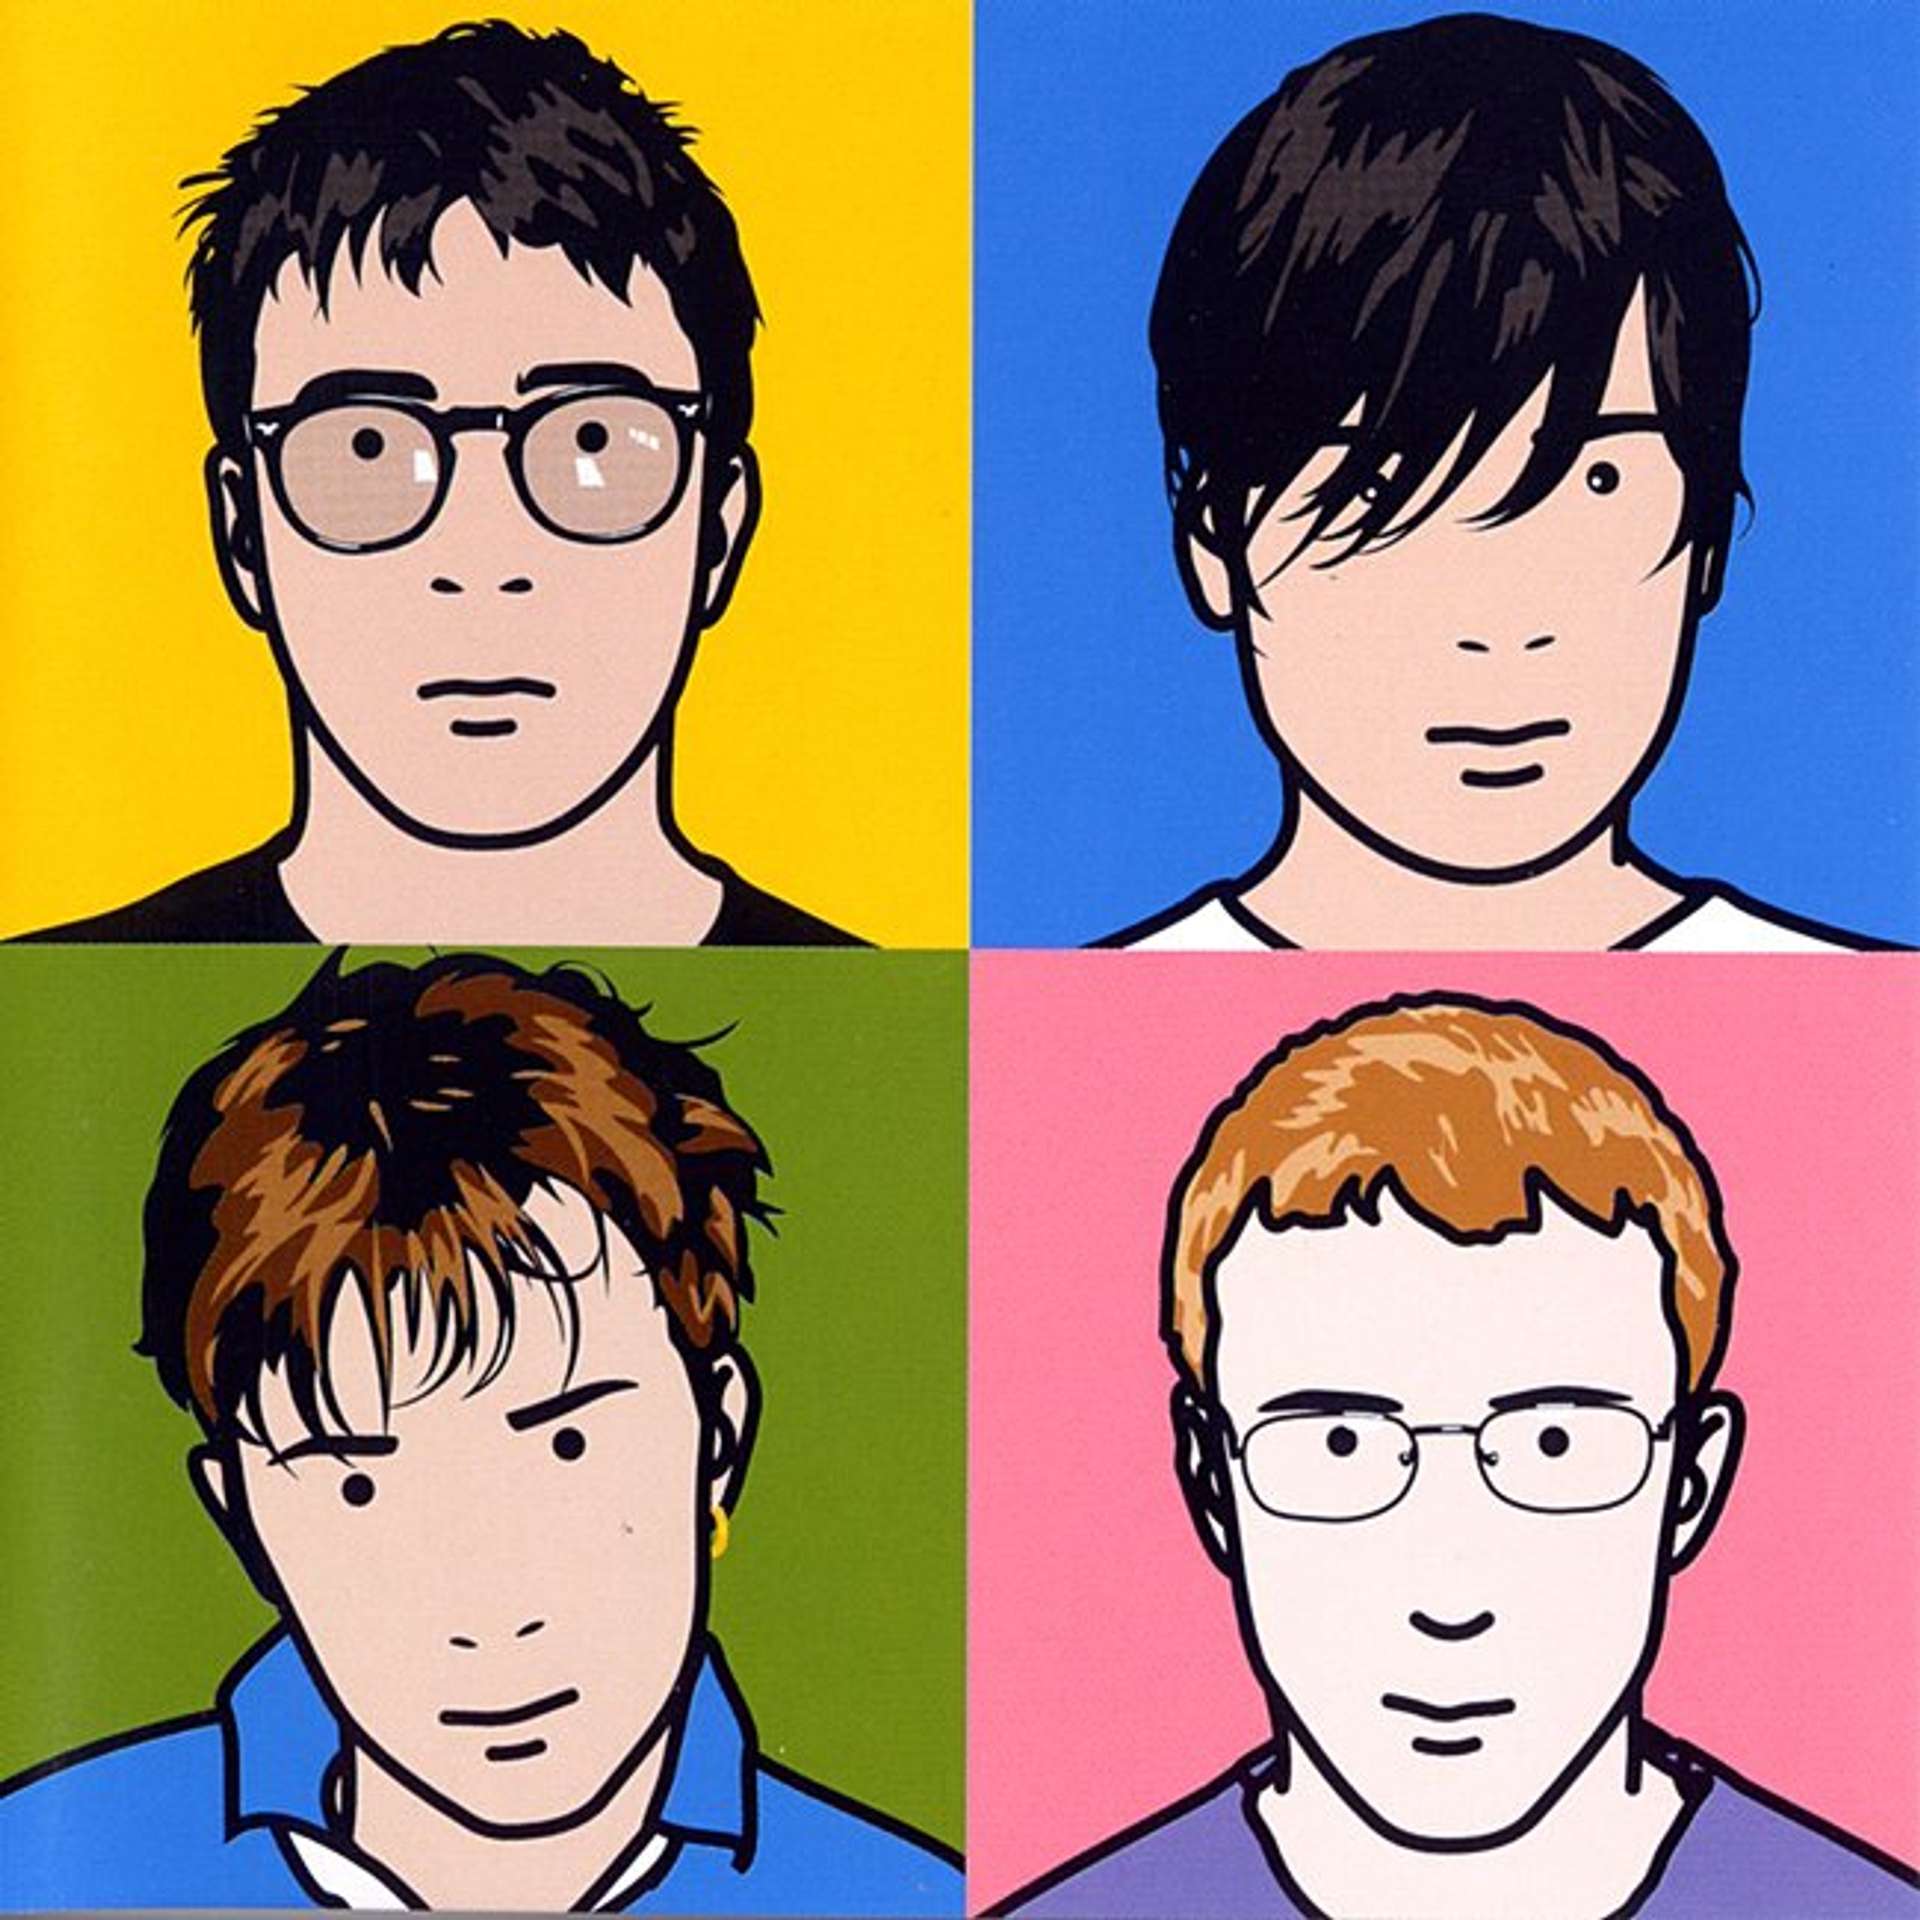 An image of the album cover for Blur: The Best Of, painted by artist Julian Opie. It depicts four individual portraits of the band’s members, in the artist’s signature minimalist and caricatured style. Each figure sits against a distinct solid colour background.